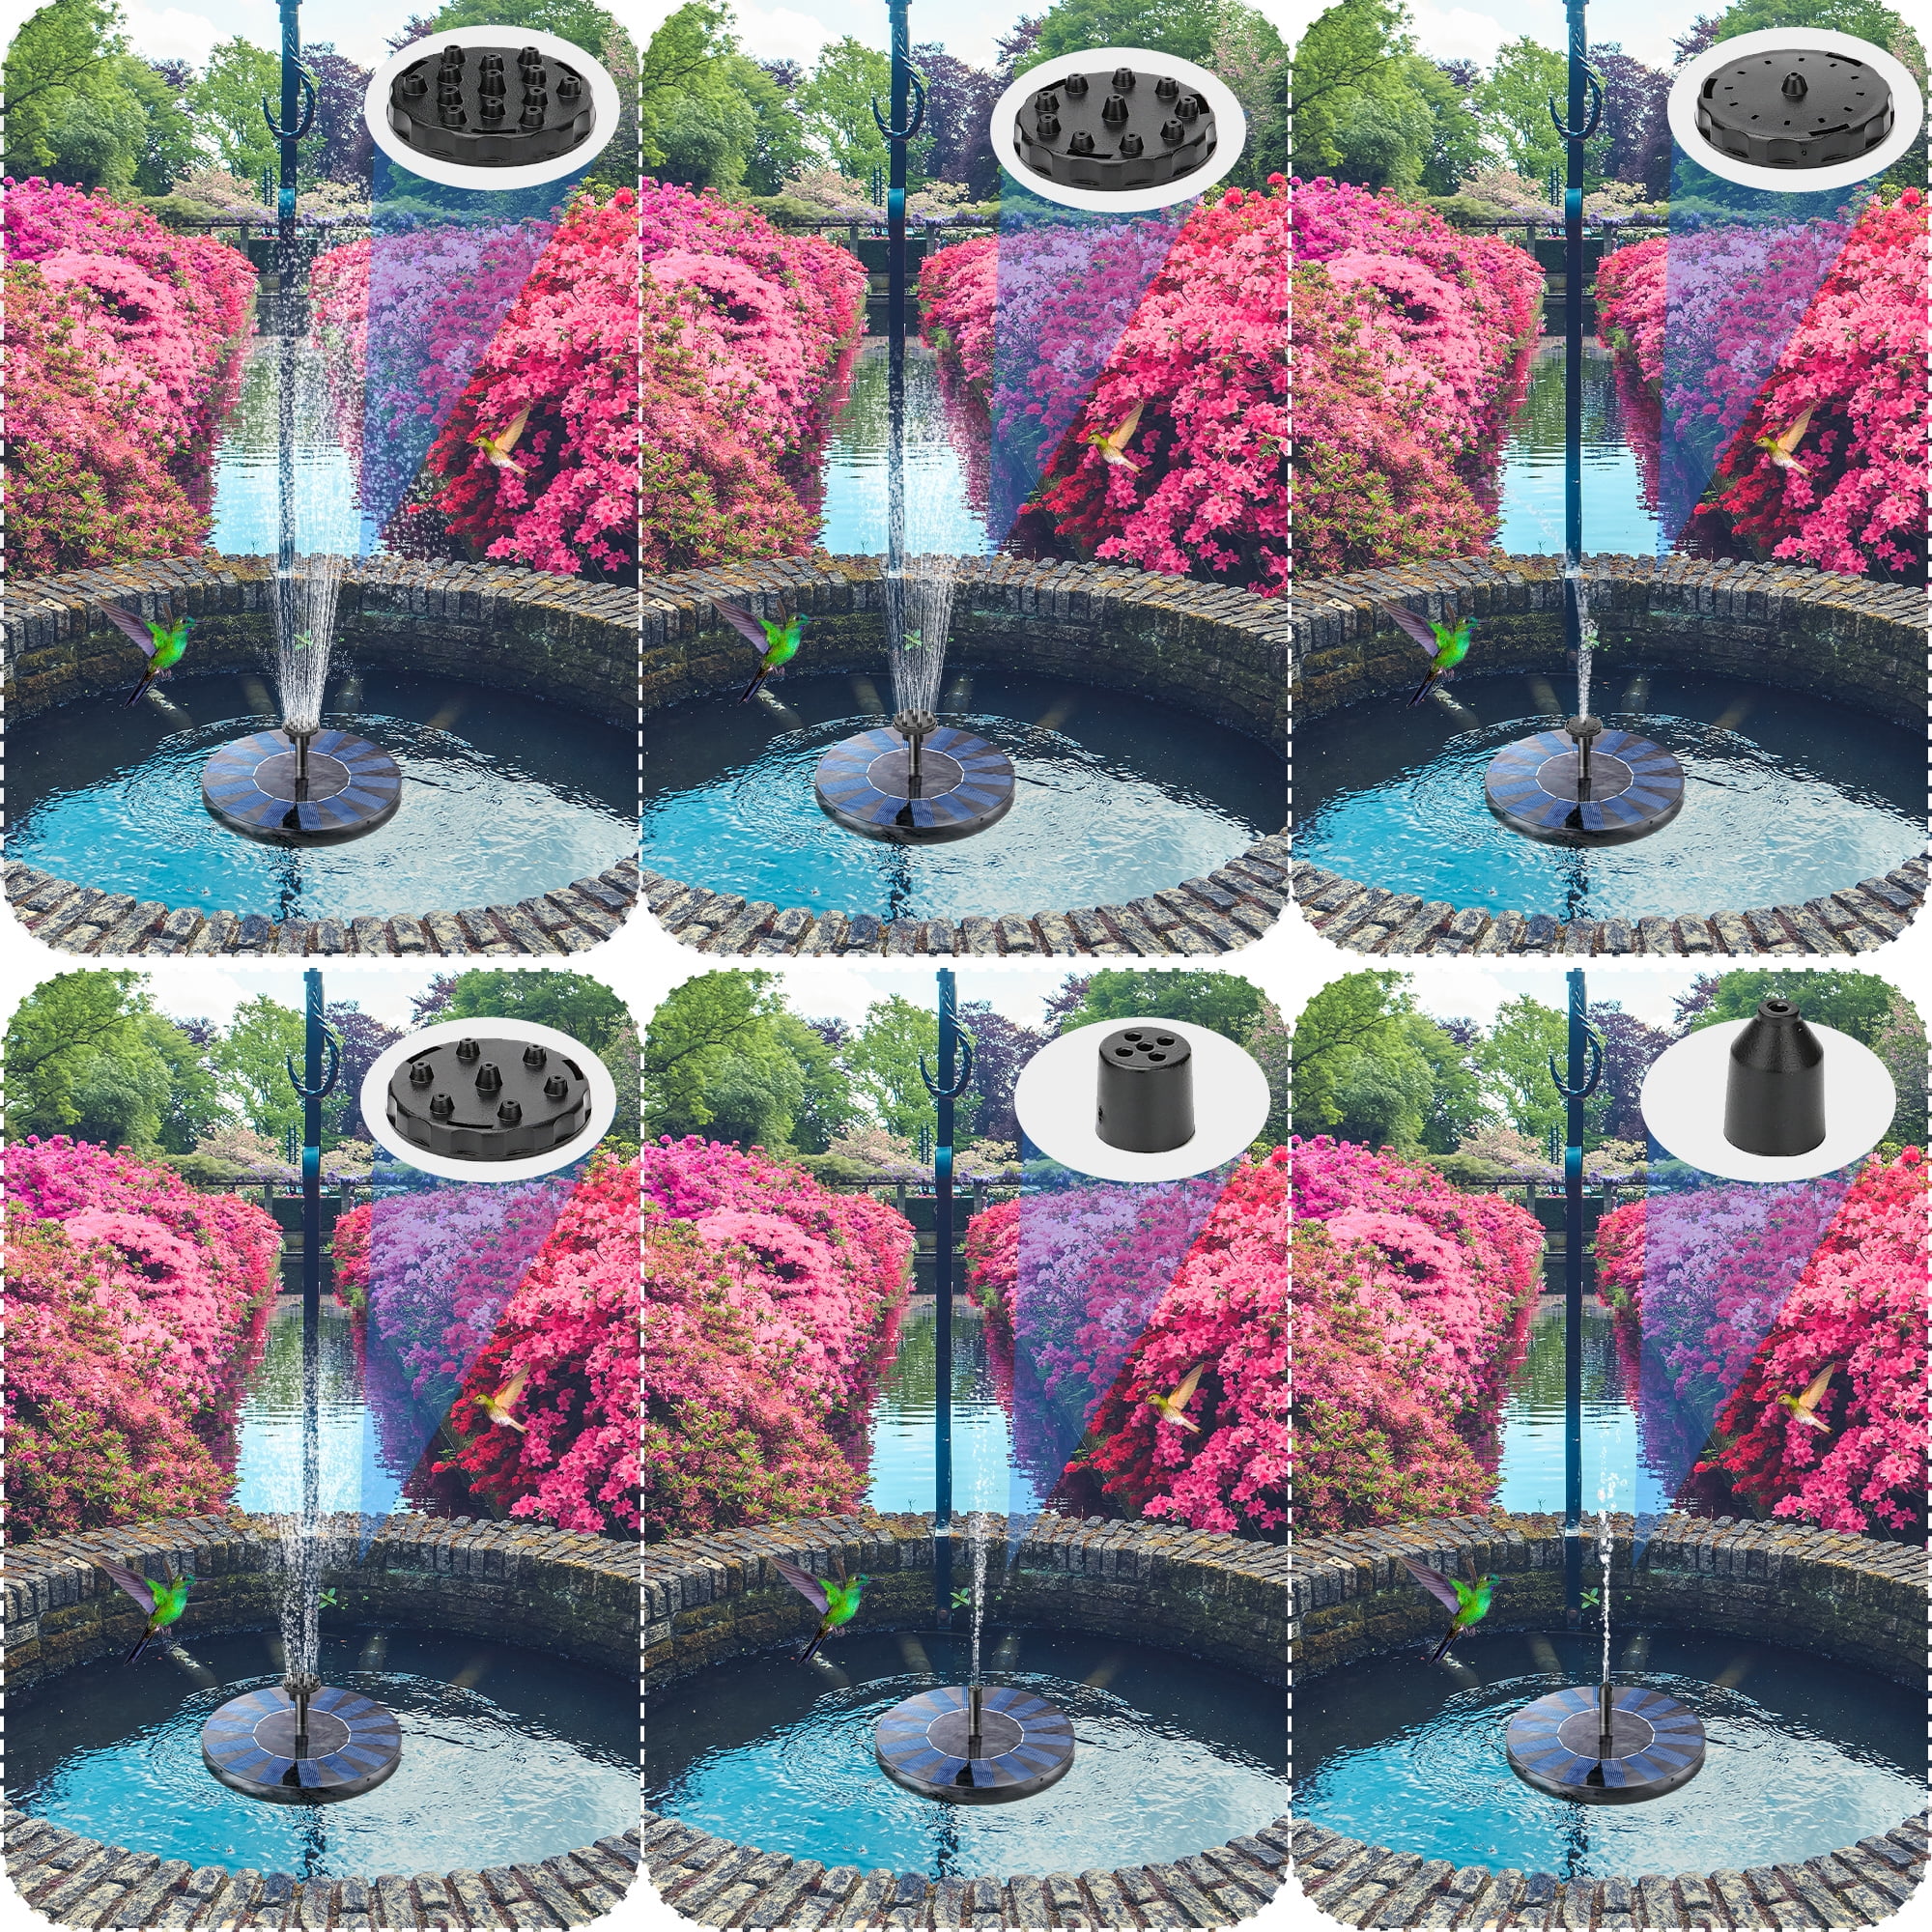  NiceBuy Solar Fountain Pump with 6 Nozzles Solar Powered Water  Fountain LED Floating Pool Fountain with Lights RGB Multicolor for Bird  Bath Pond Garden Outdoor : Patio, Lawn & Garden